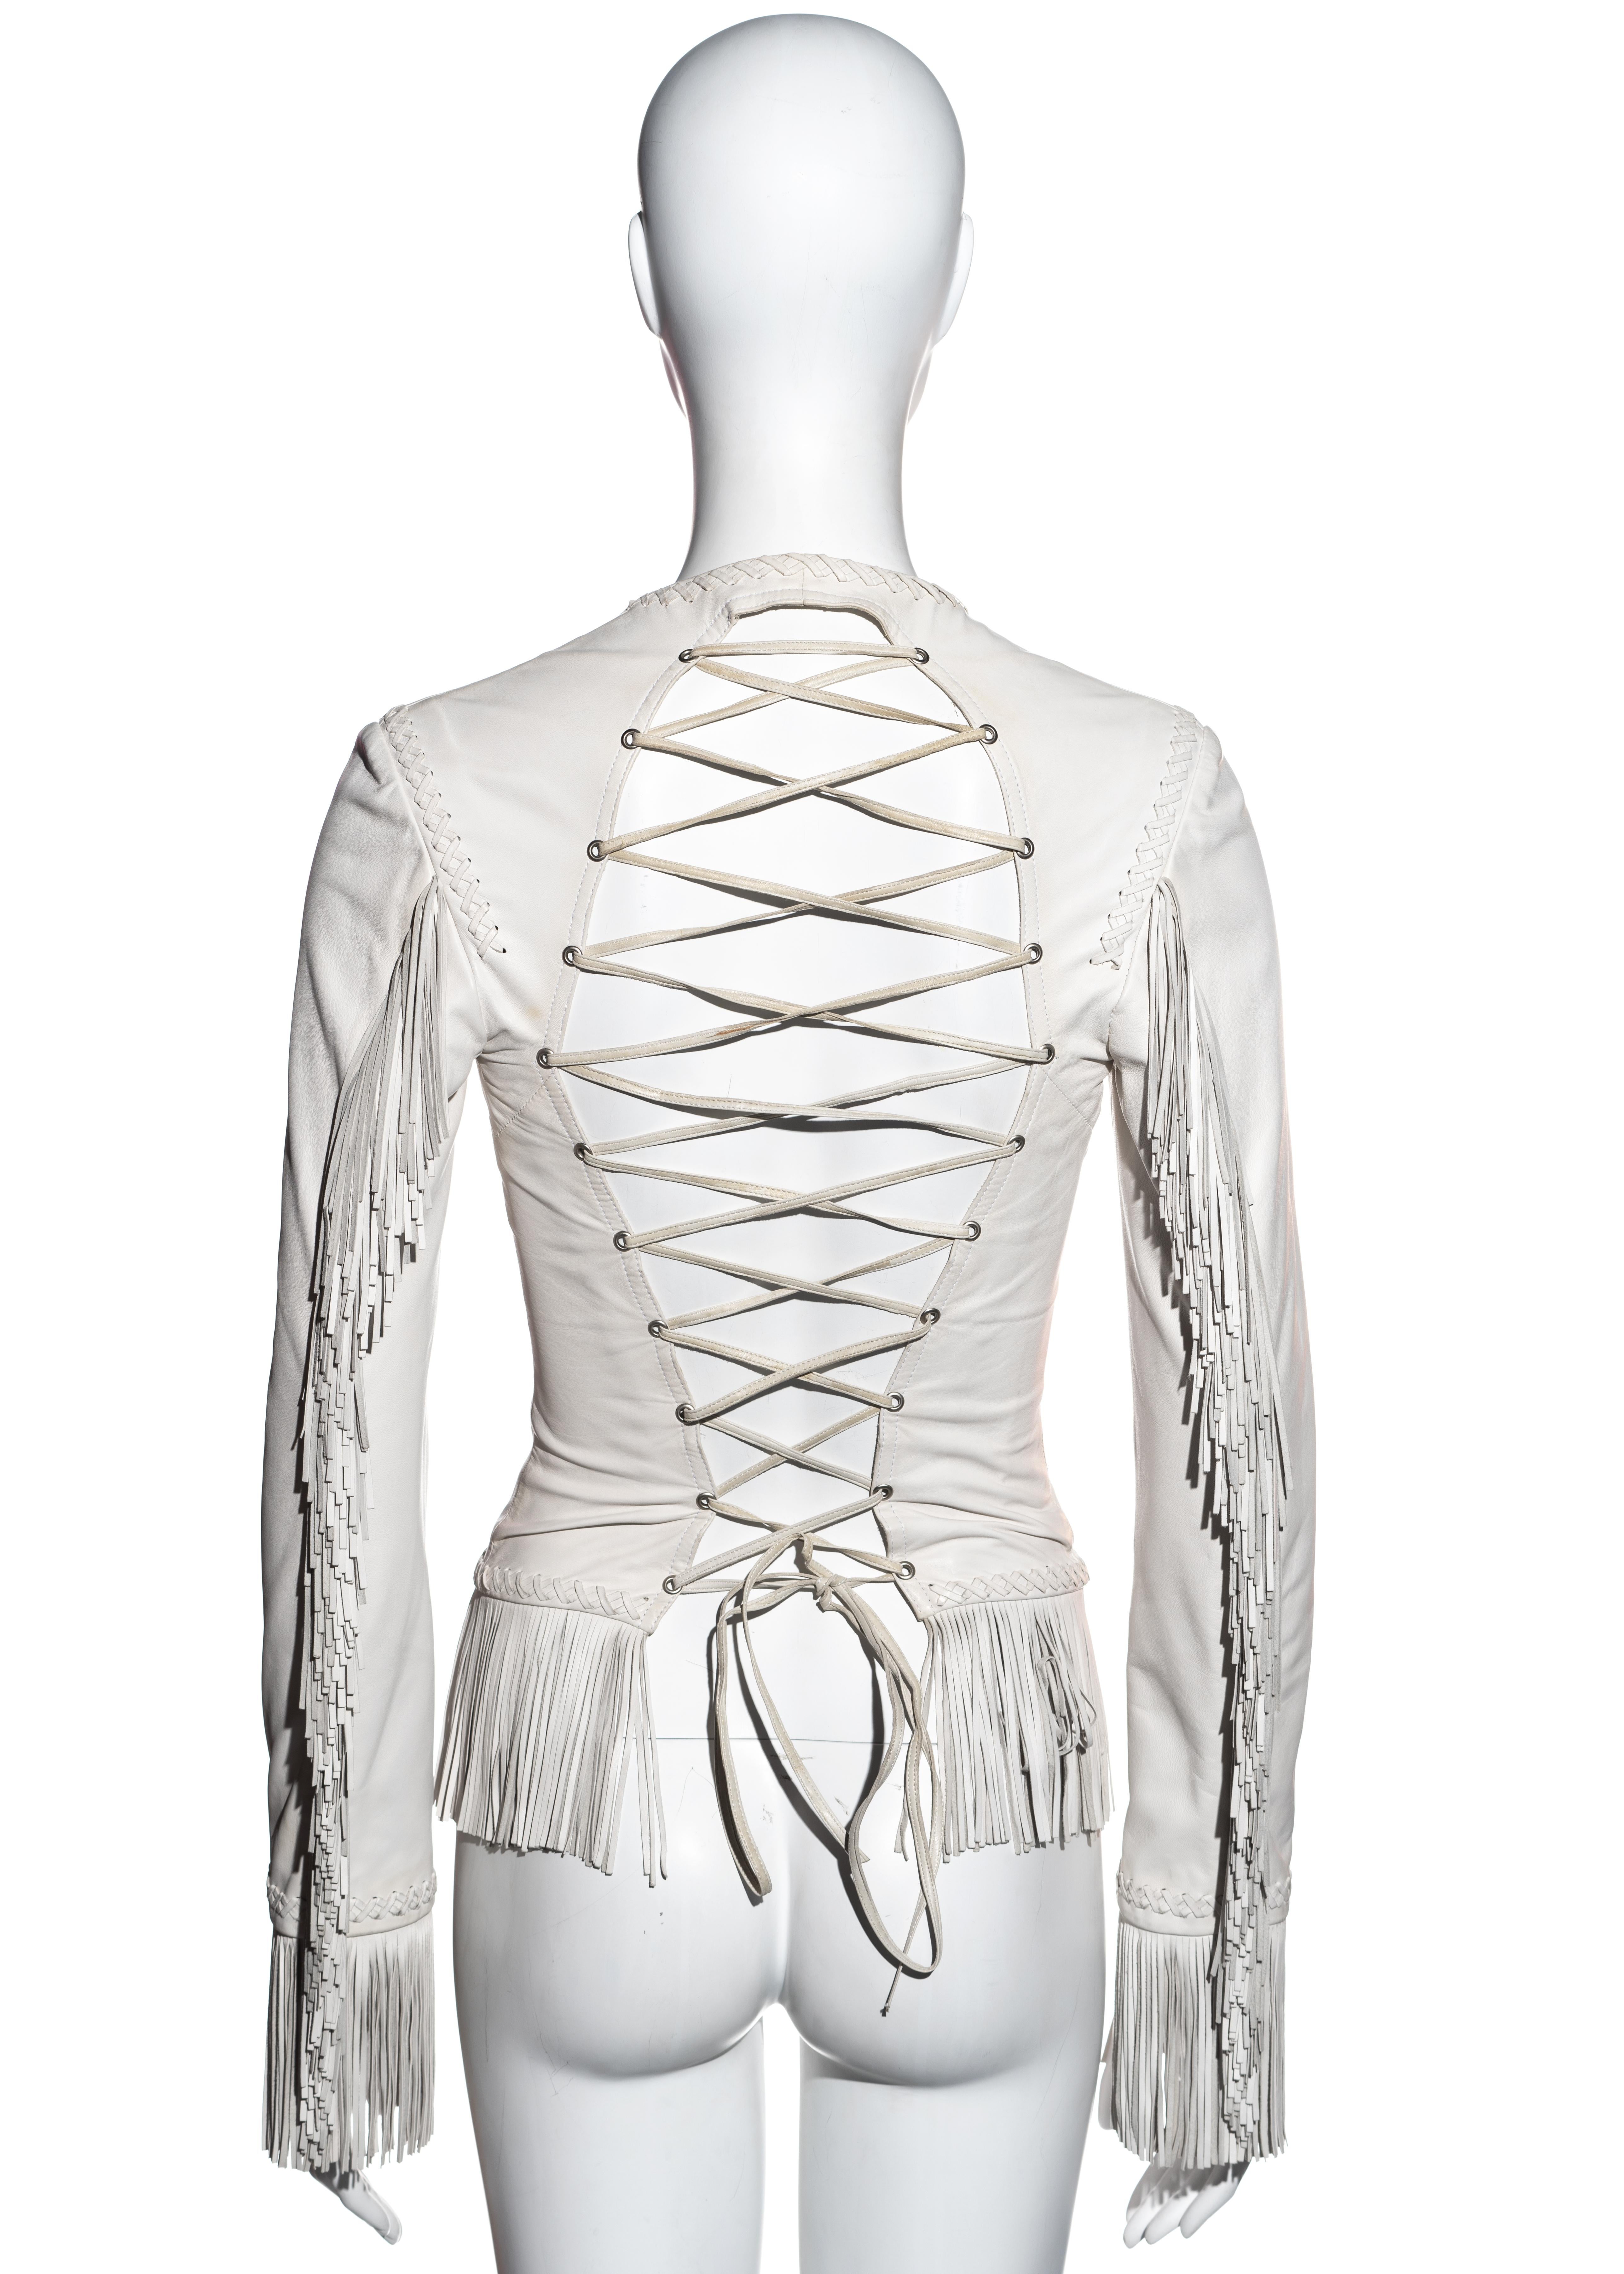 ▪ Gianni Versace white leather jacket 
▪ Open back with leather lace-up fastening 
▪ Leather fringes on sleeves, cuffs and waist 
▪ Braided leather detail on seams 
▪ Zip front fastening 
▪ IT 42 - FR 38 - UK 10 - US 6
▪ Spring-Summer 2002